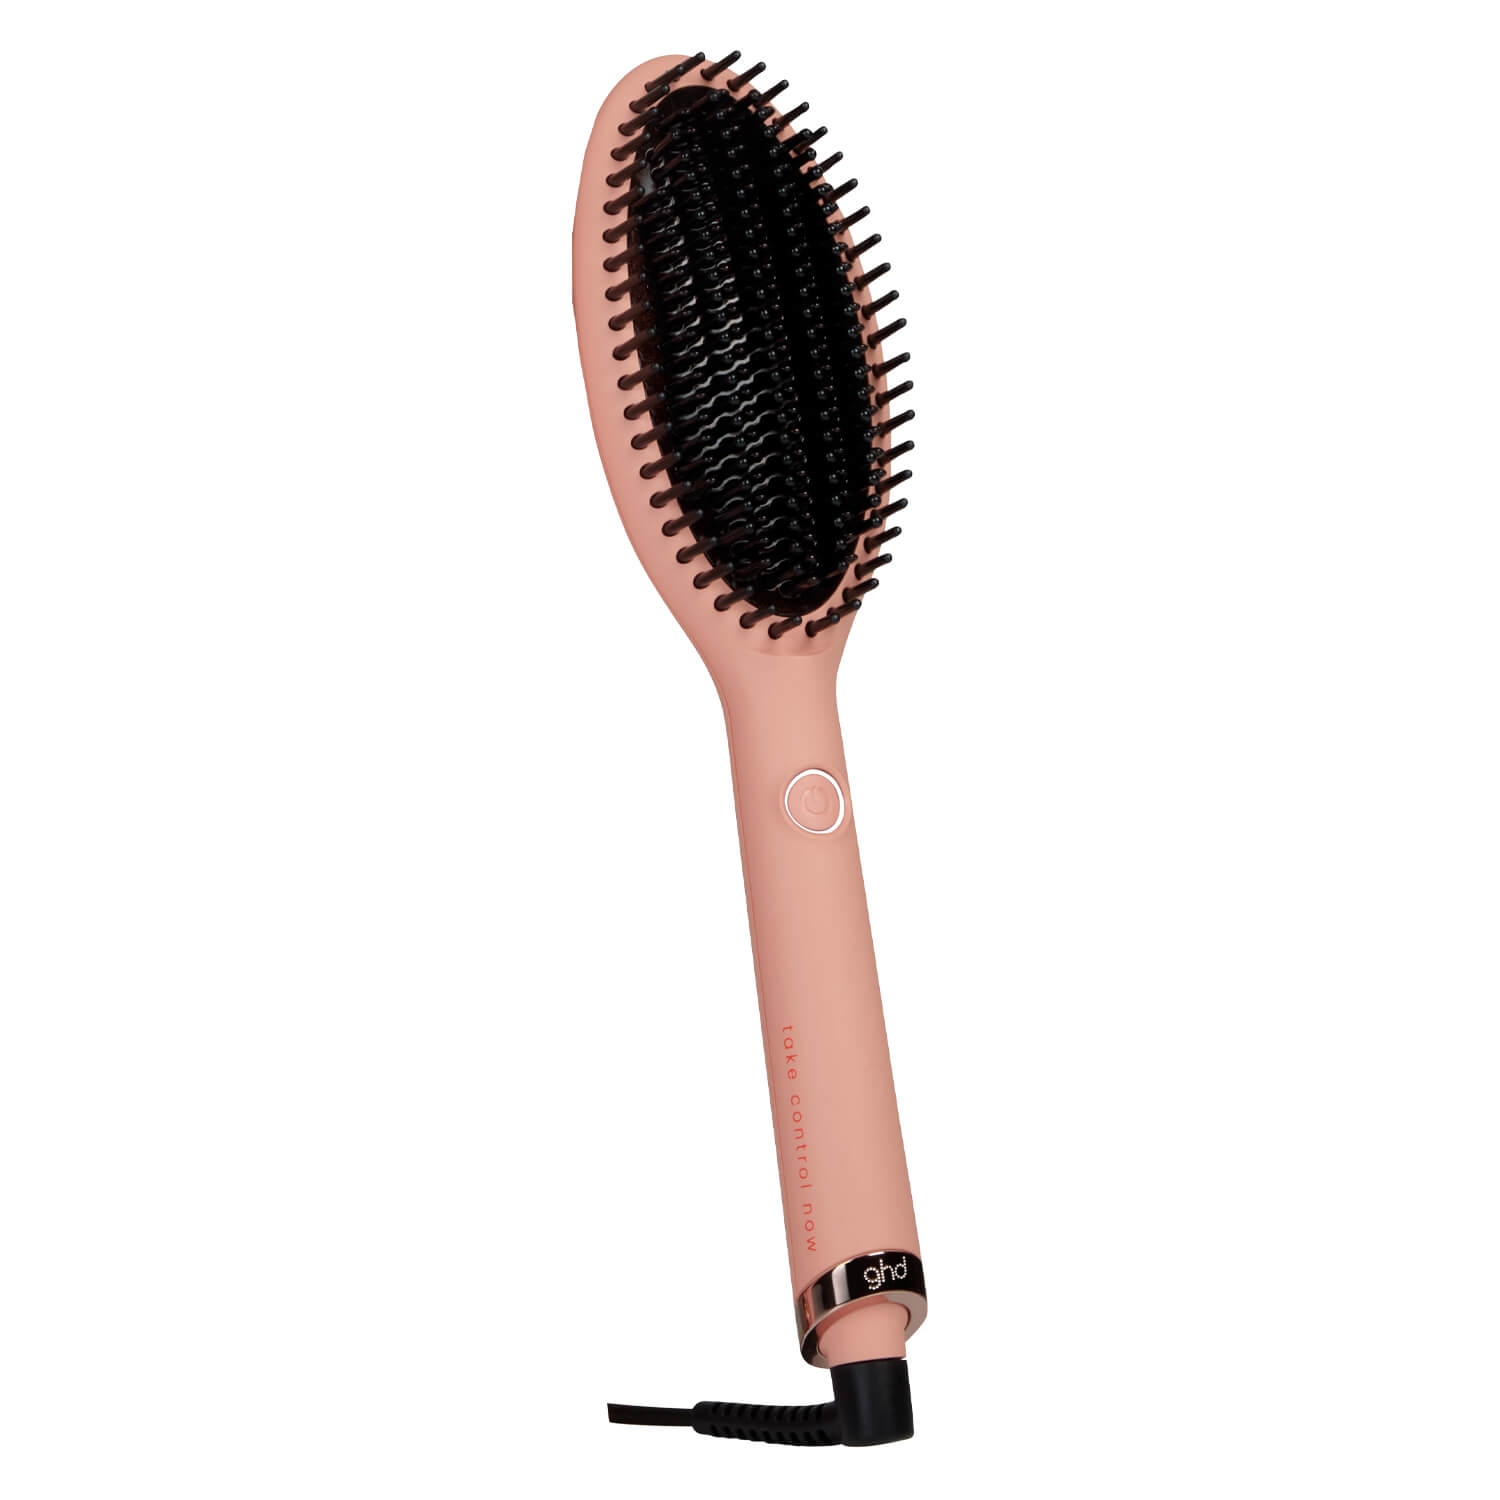 Product image from ghd Brushes - Glide Hot Brush Pink Peach Charity Edition